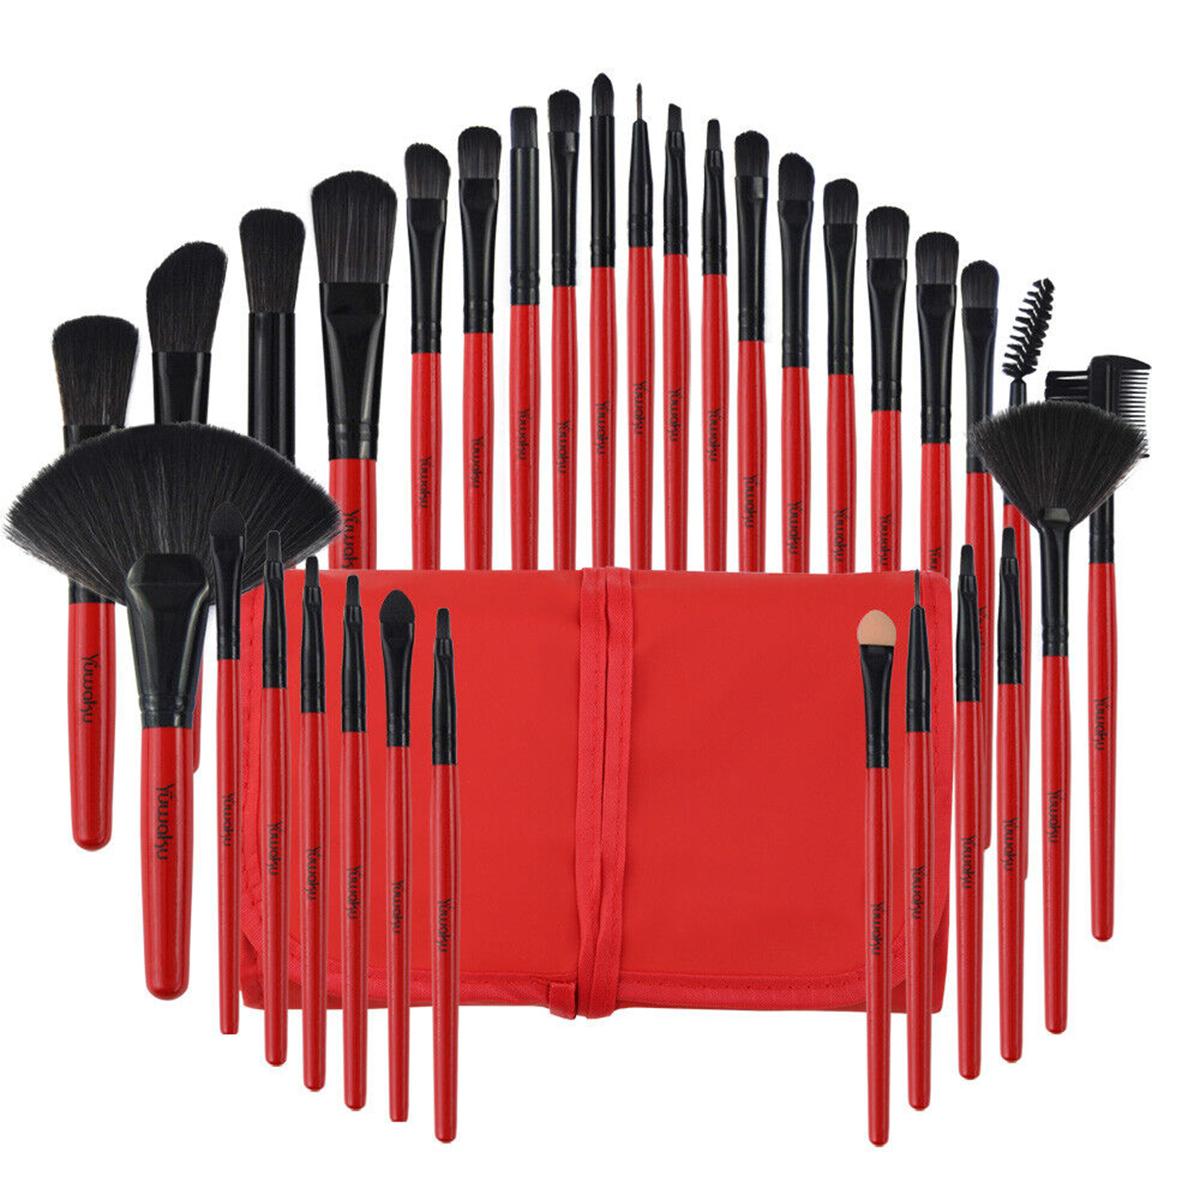 32PCS Professional Make Up Brushes Set Cosmetic Tool Makeup With Carry Bag